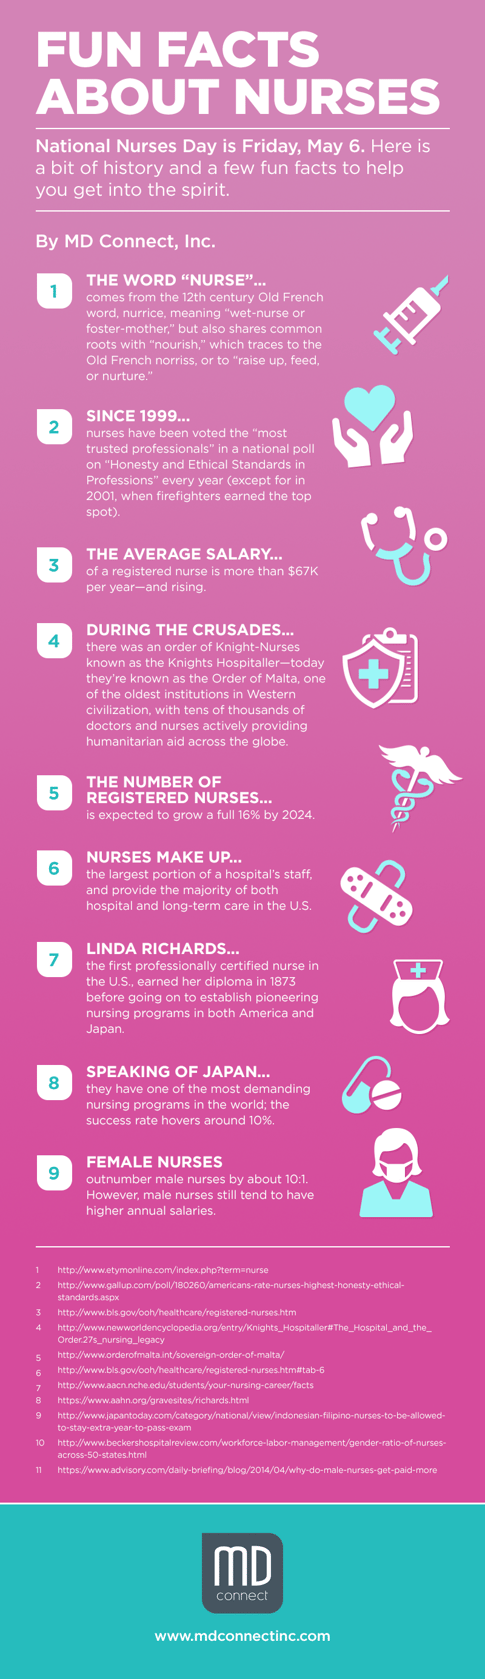 nurses-day-infographic_1.png